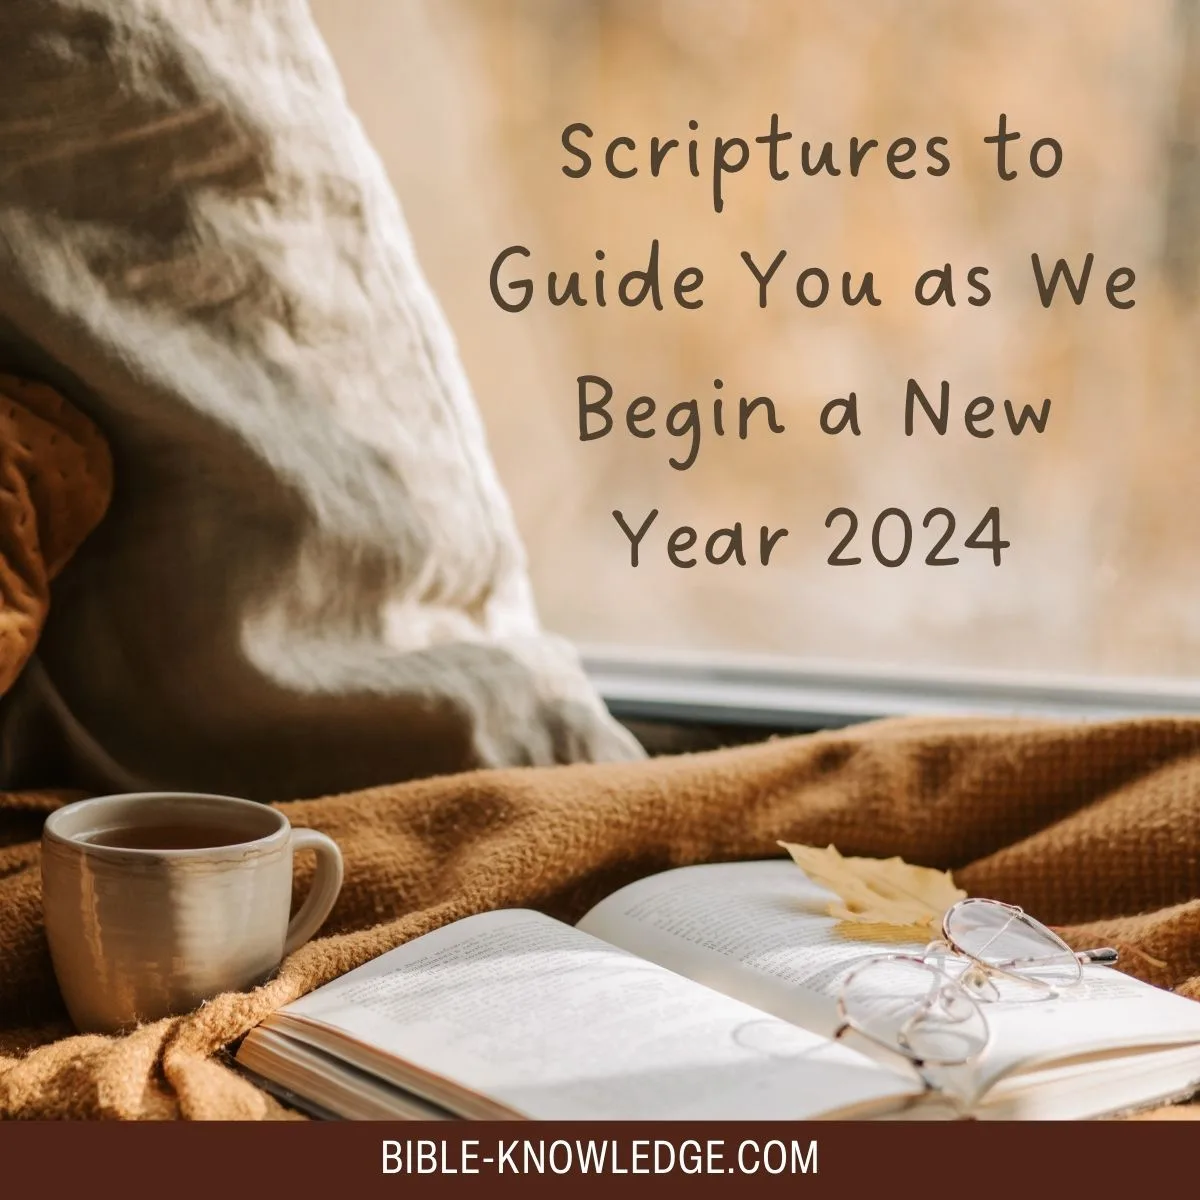 Scriptures to Guide You as We Begin a New Year 2024